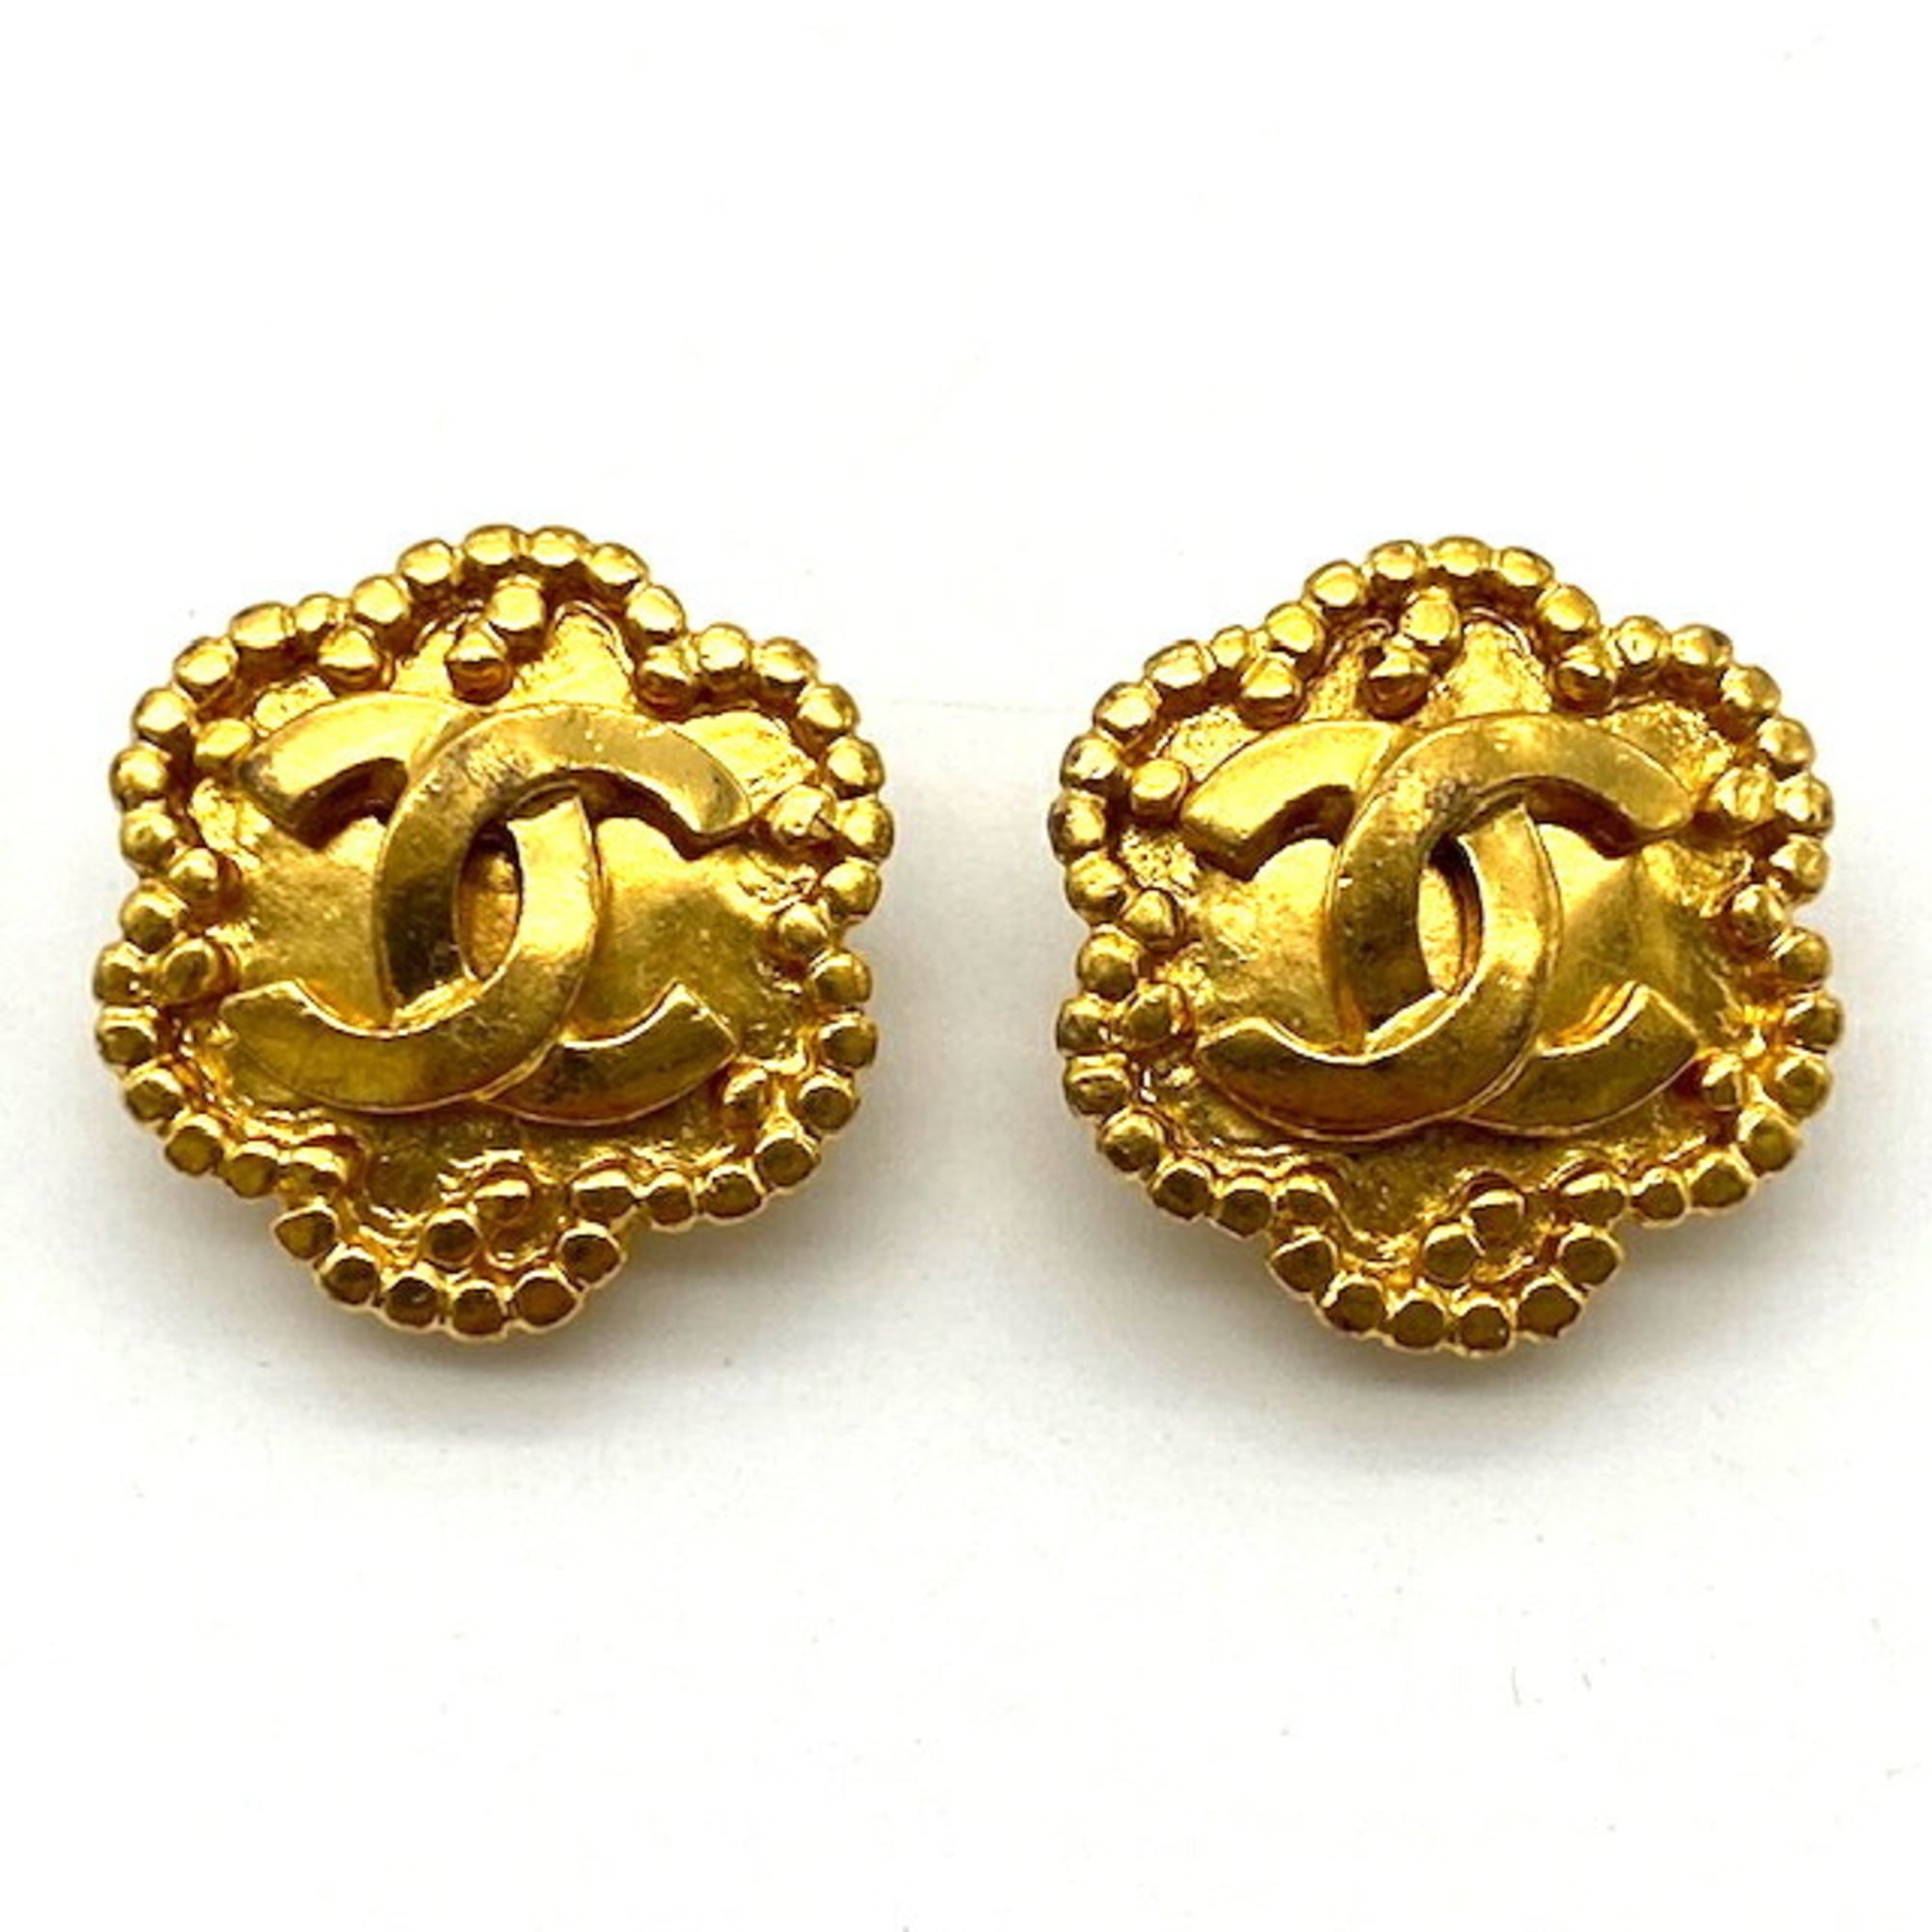 Chanel - Authenticated Earrings - Gold Plated Gold for Women, Very Good Condition